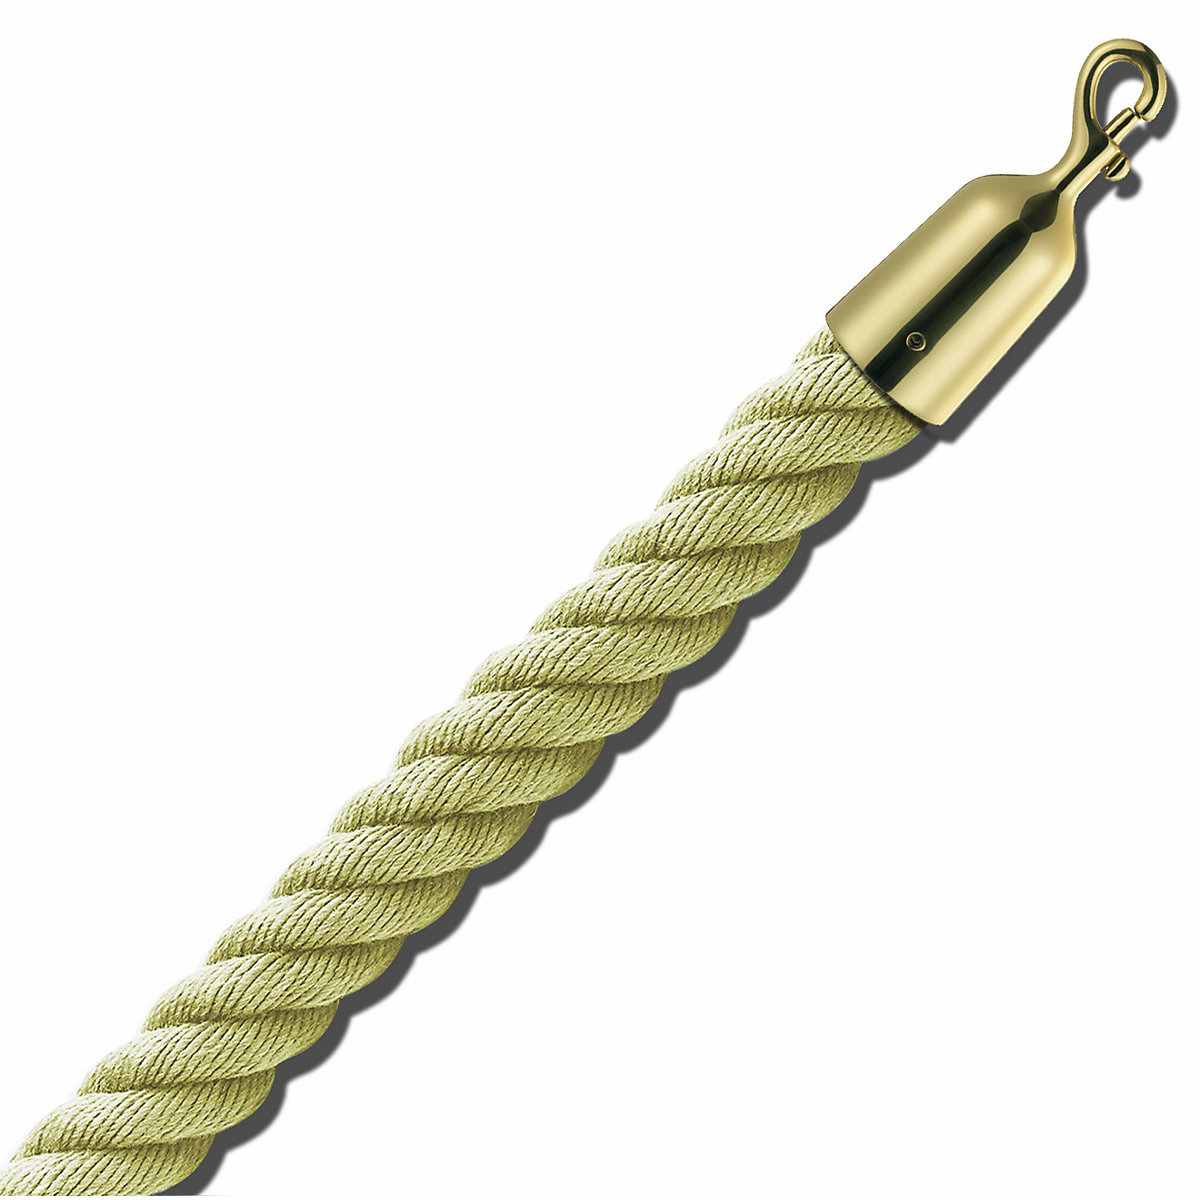 Barrier cord 1.5 m, brass end caps, beige cord-4